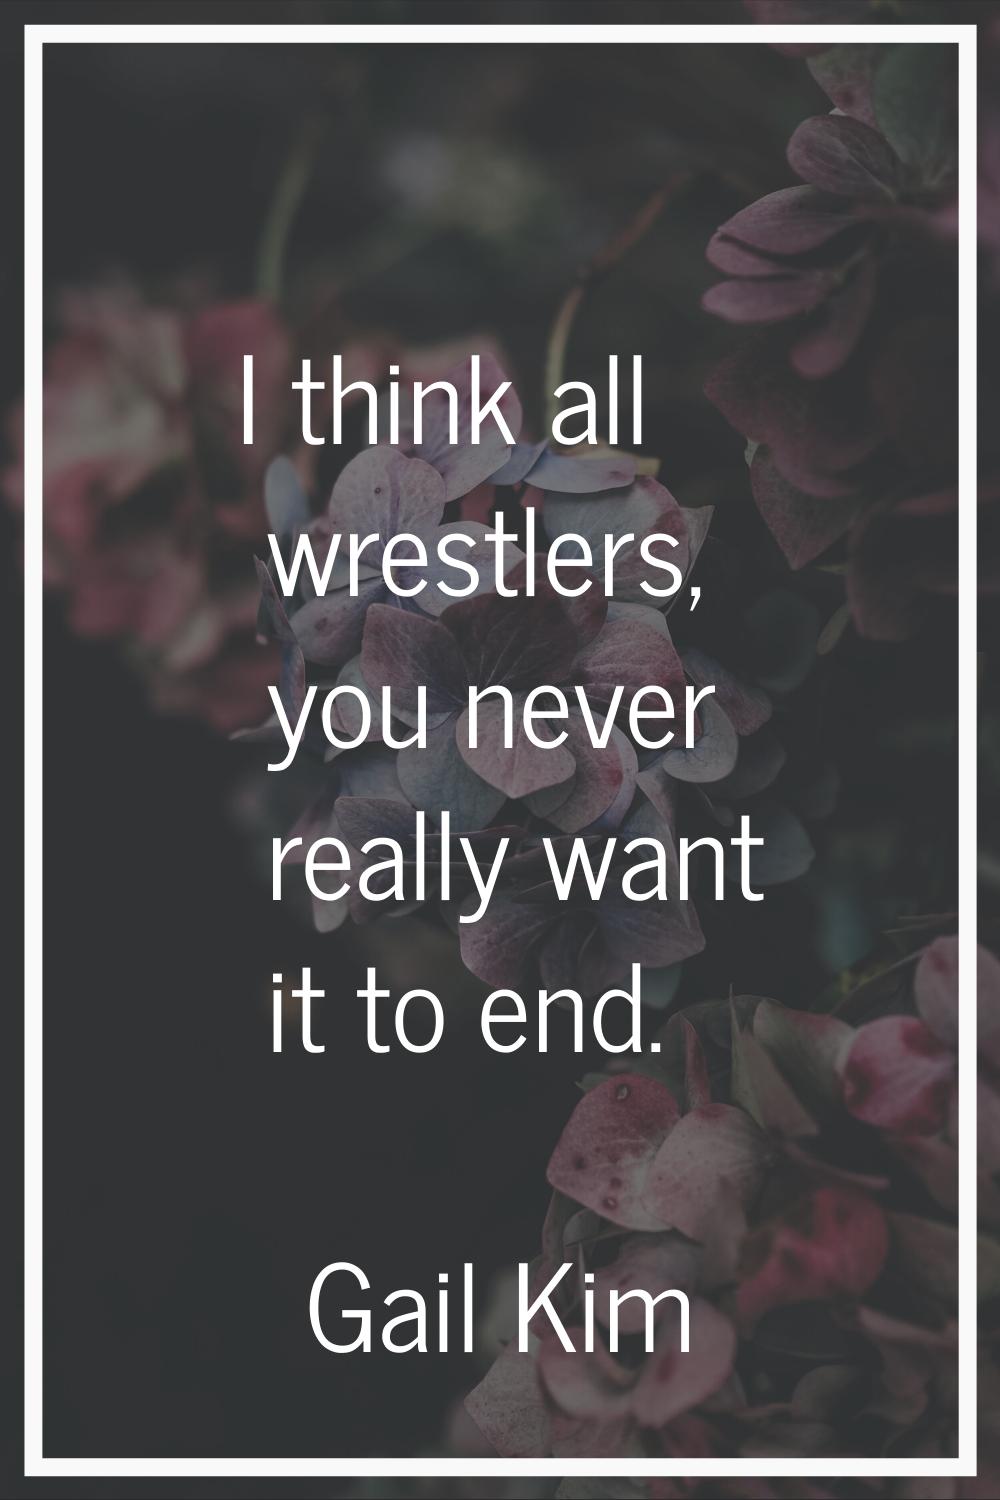 I think all wrestlers, you never really want it to end.